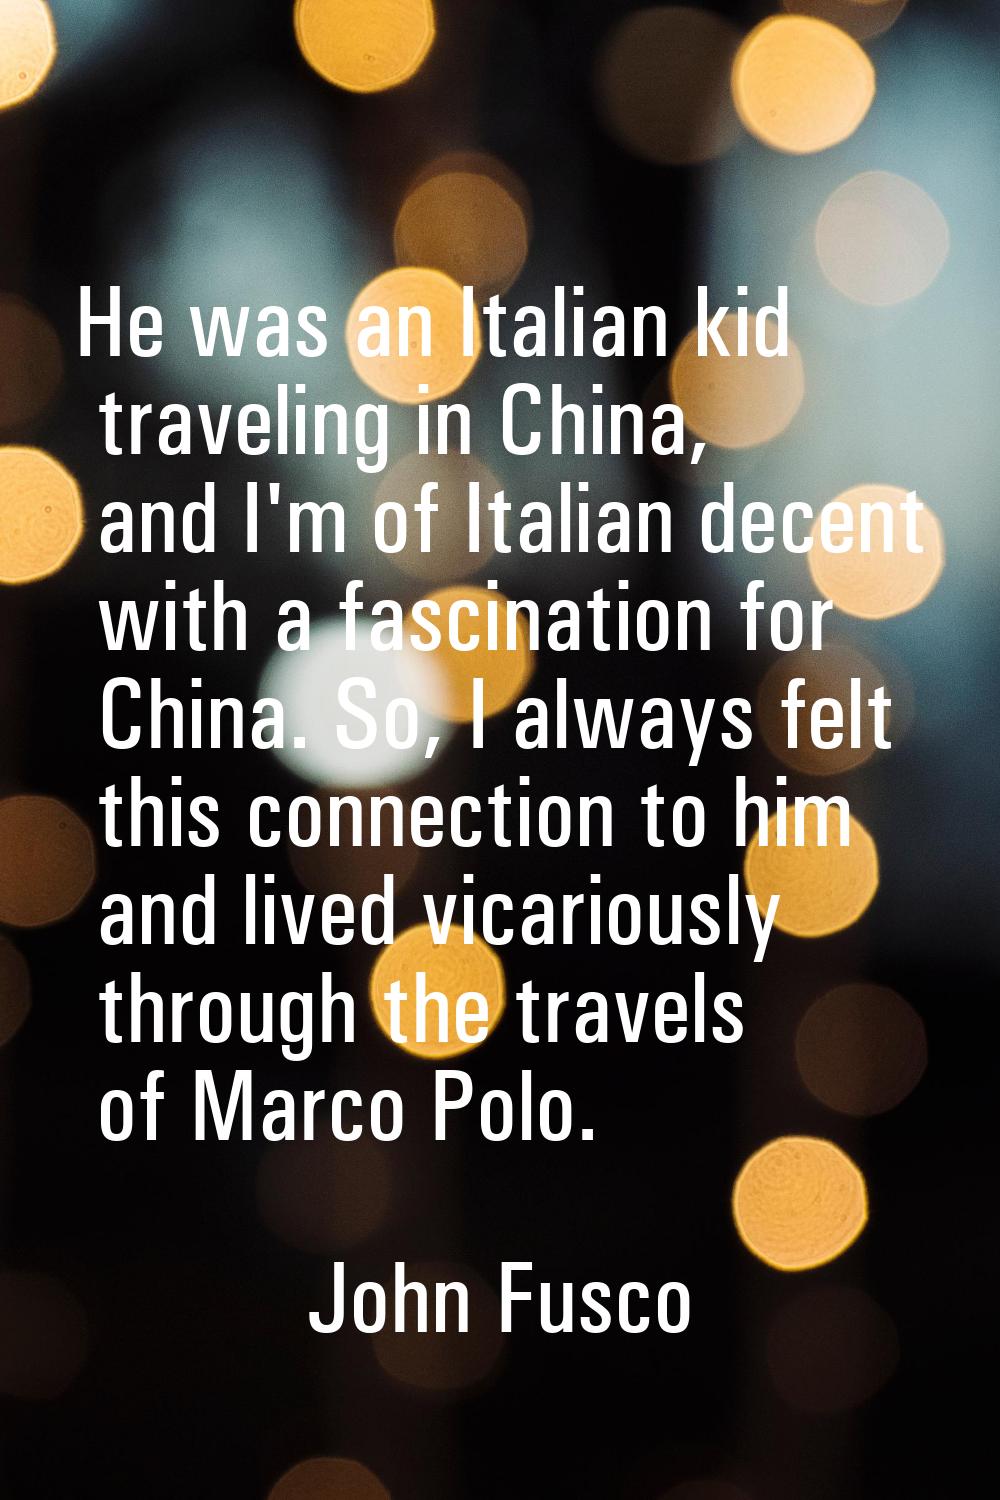 He was an Italian kid traveling in China, and I'm of Italian decent with a fascination for China. S